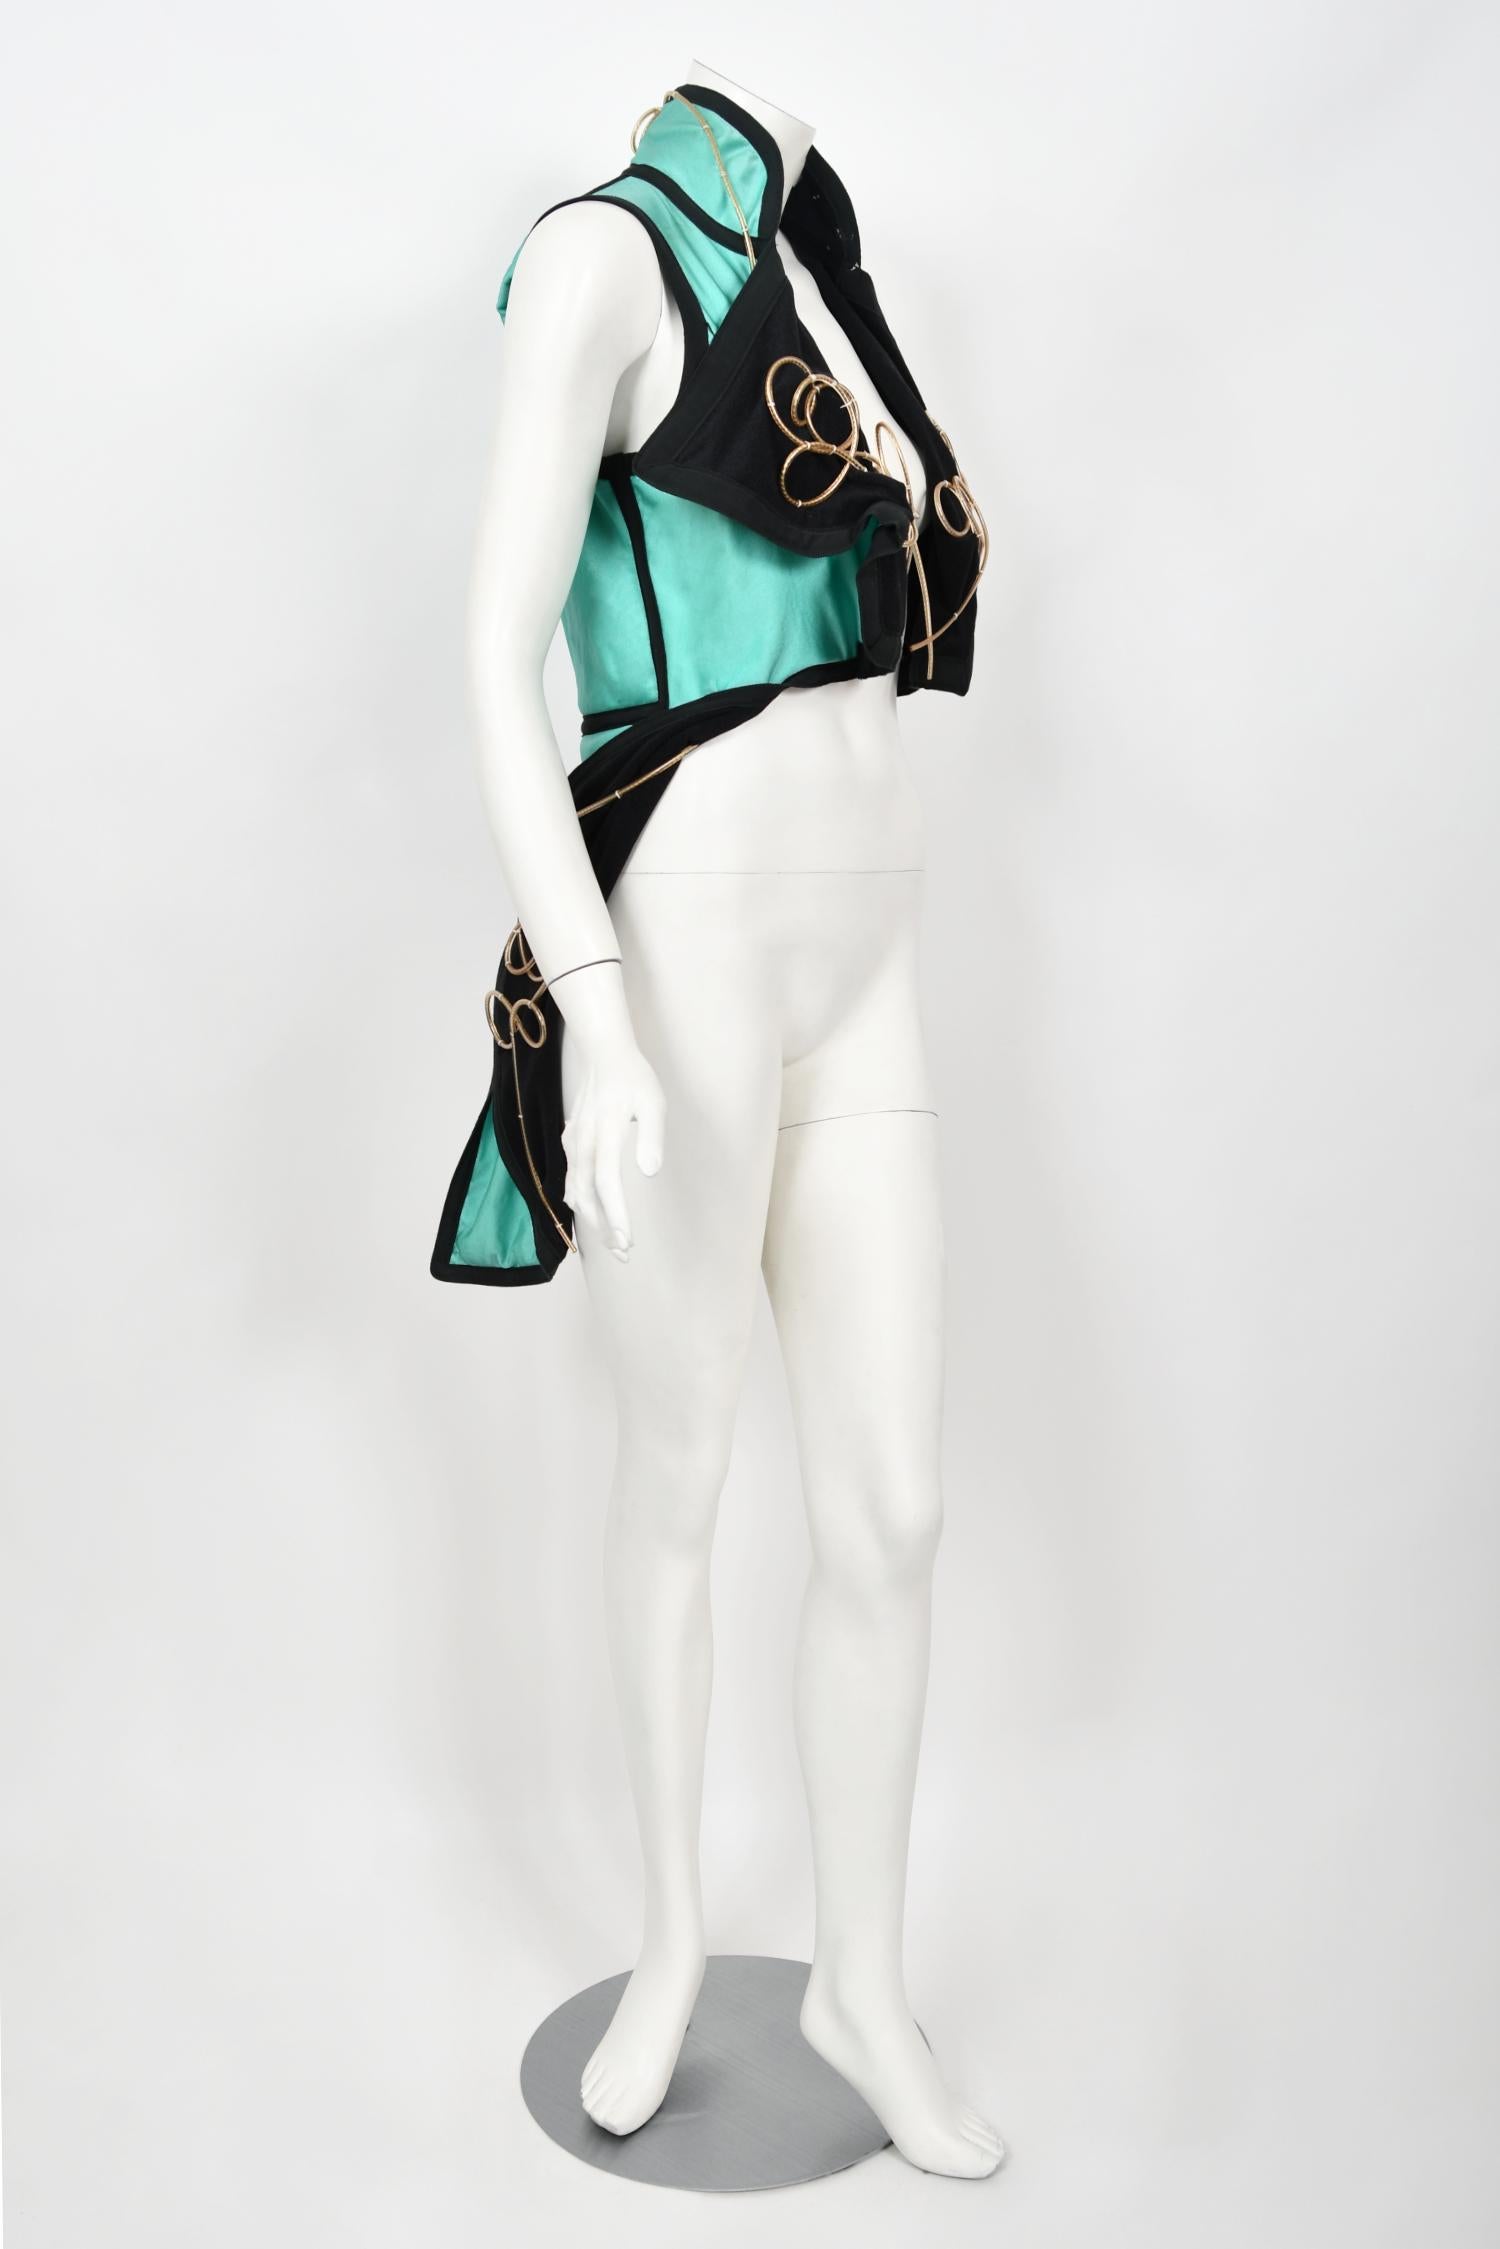 1991 John Galliano Documented Runway Black & Blue Military Inspired Cropped Vest 5